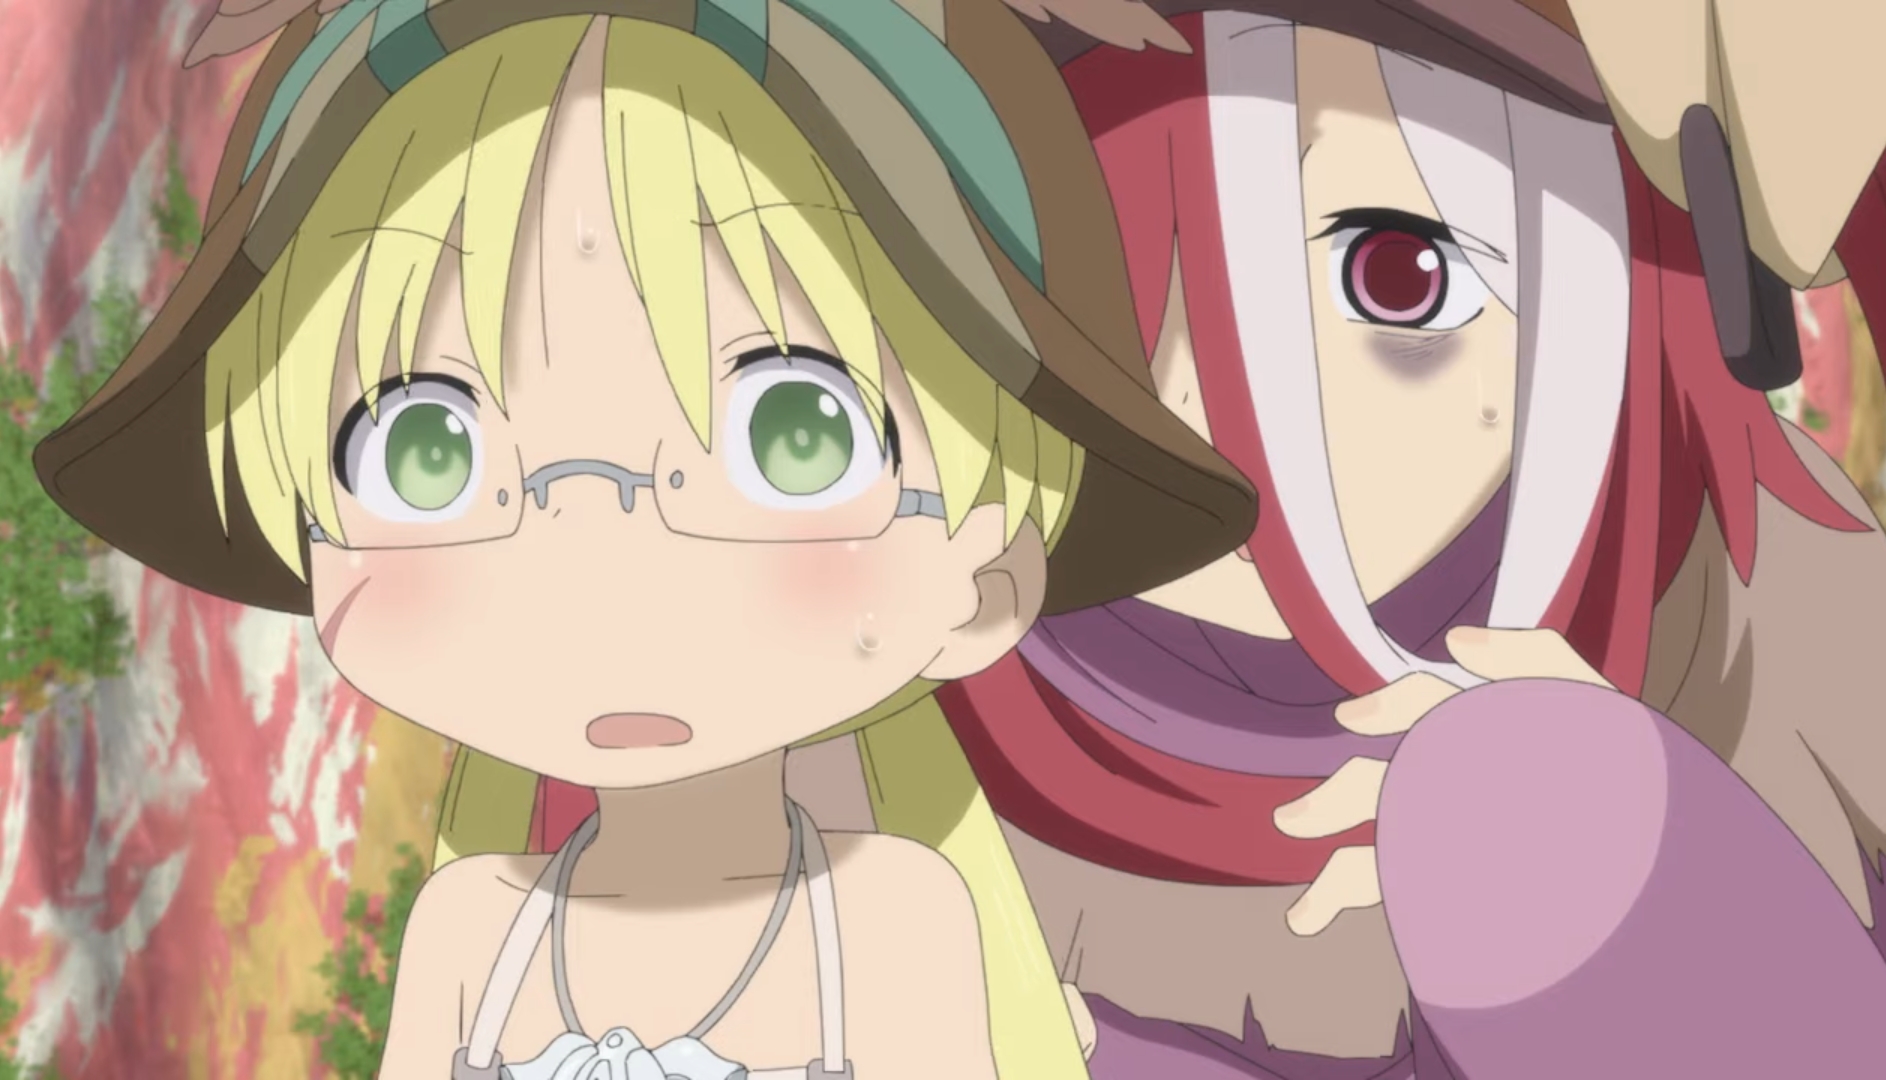 Made in Abyss Season 2 Episode 4 Review - Reg meets Faputa, Maaa